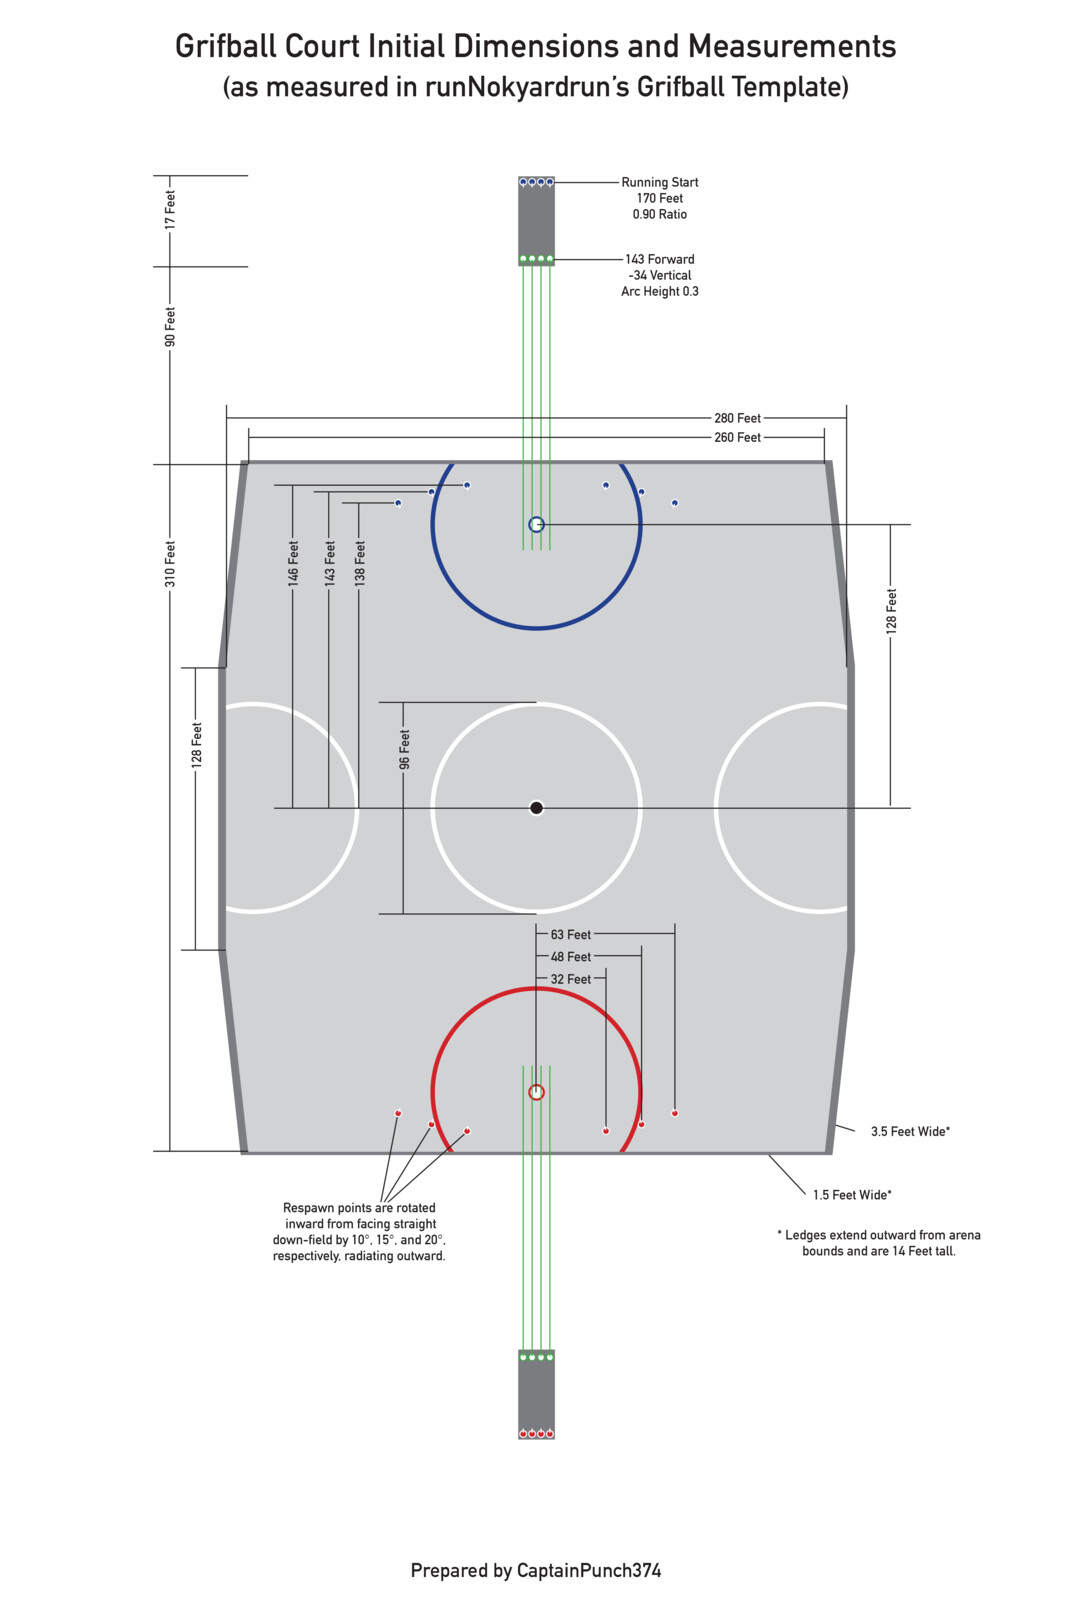 Official Grifball Court Dimensions for Halo 5 made as reference document for community